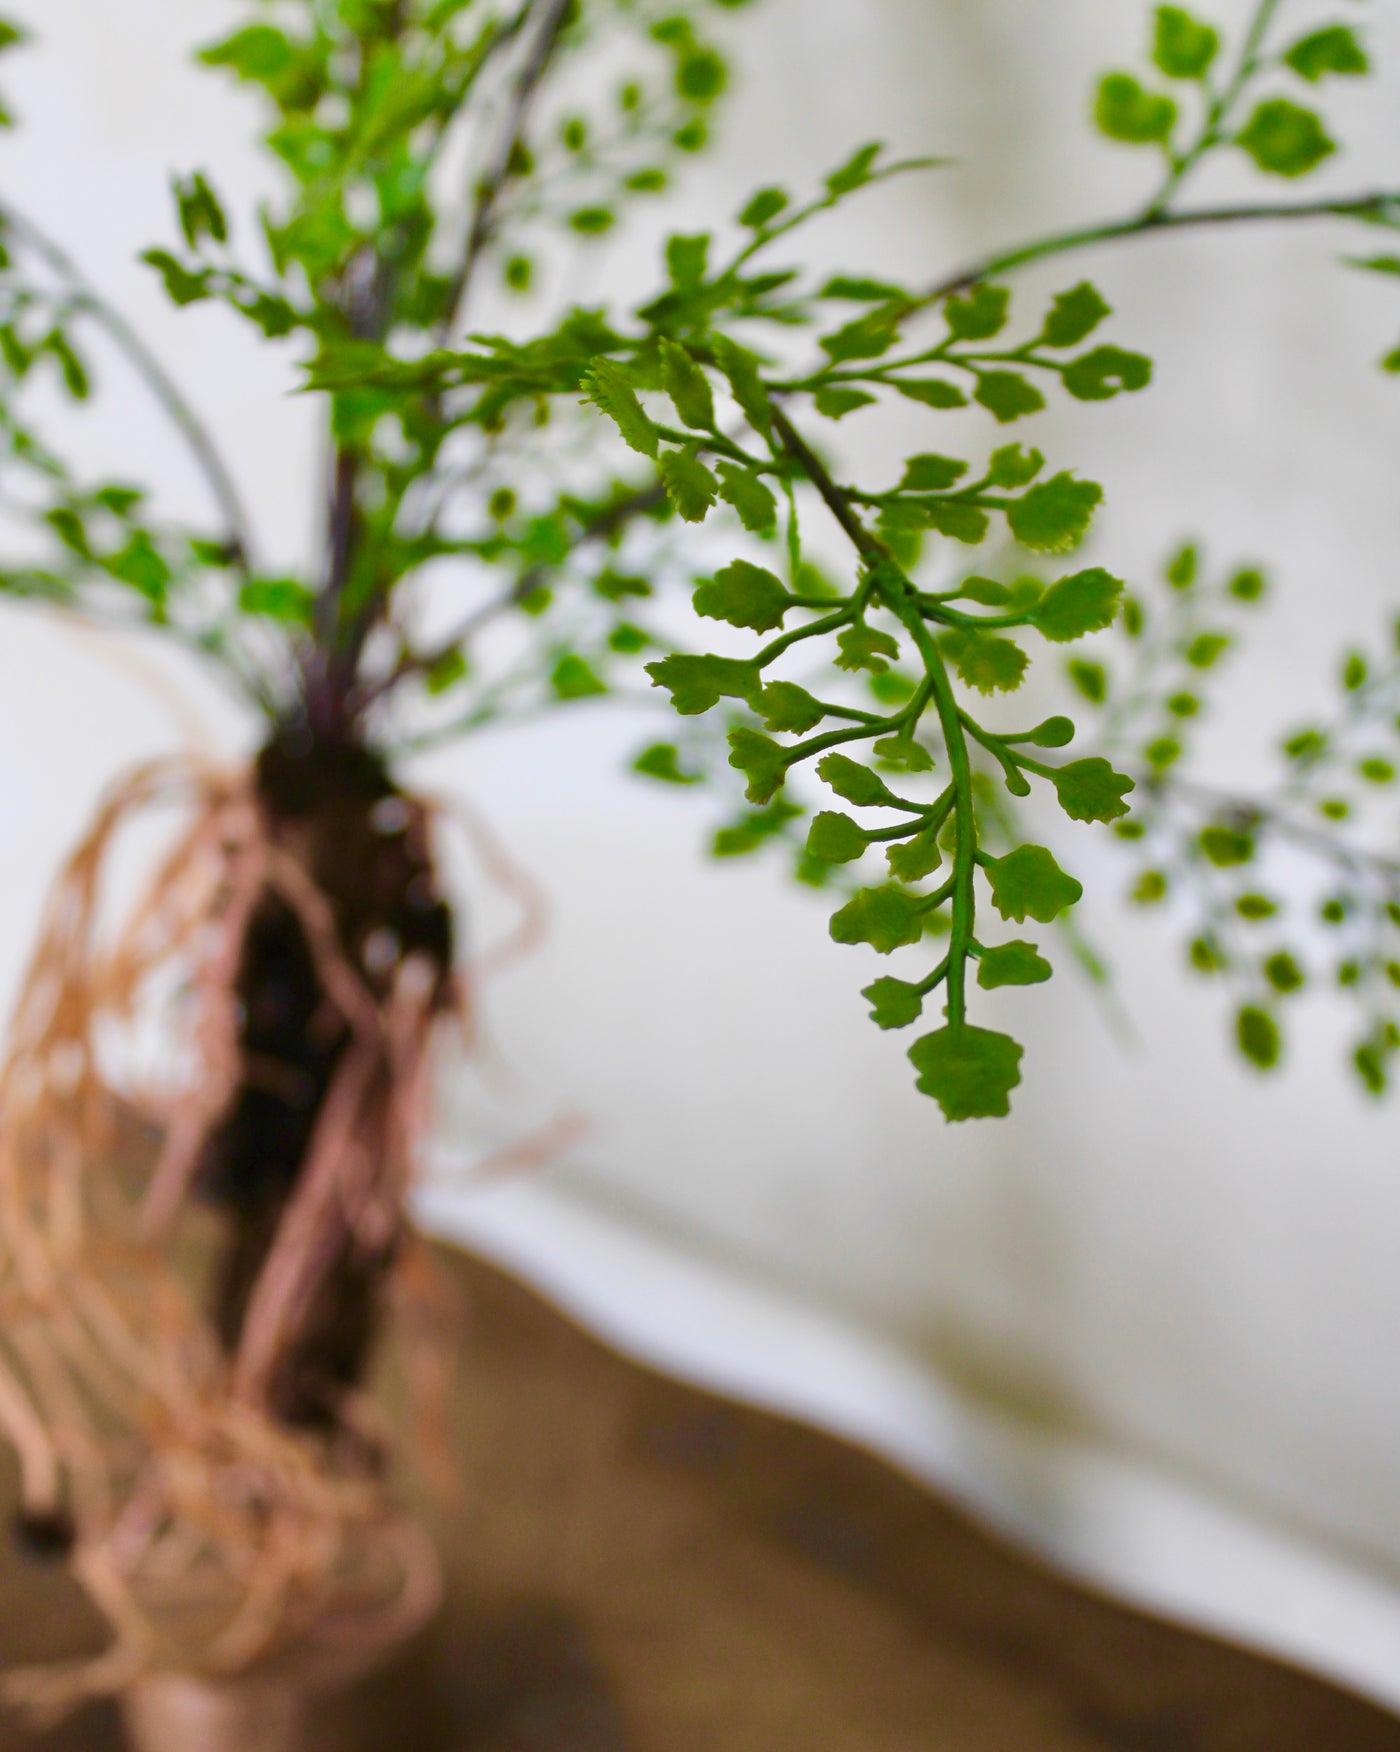 Maidenhair with Exposed Roots